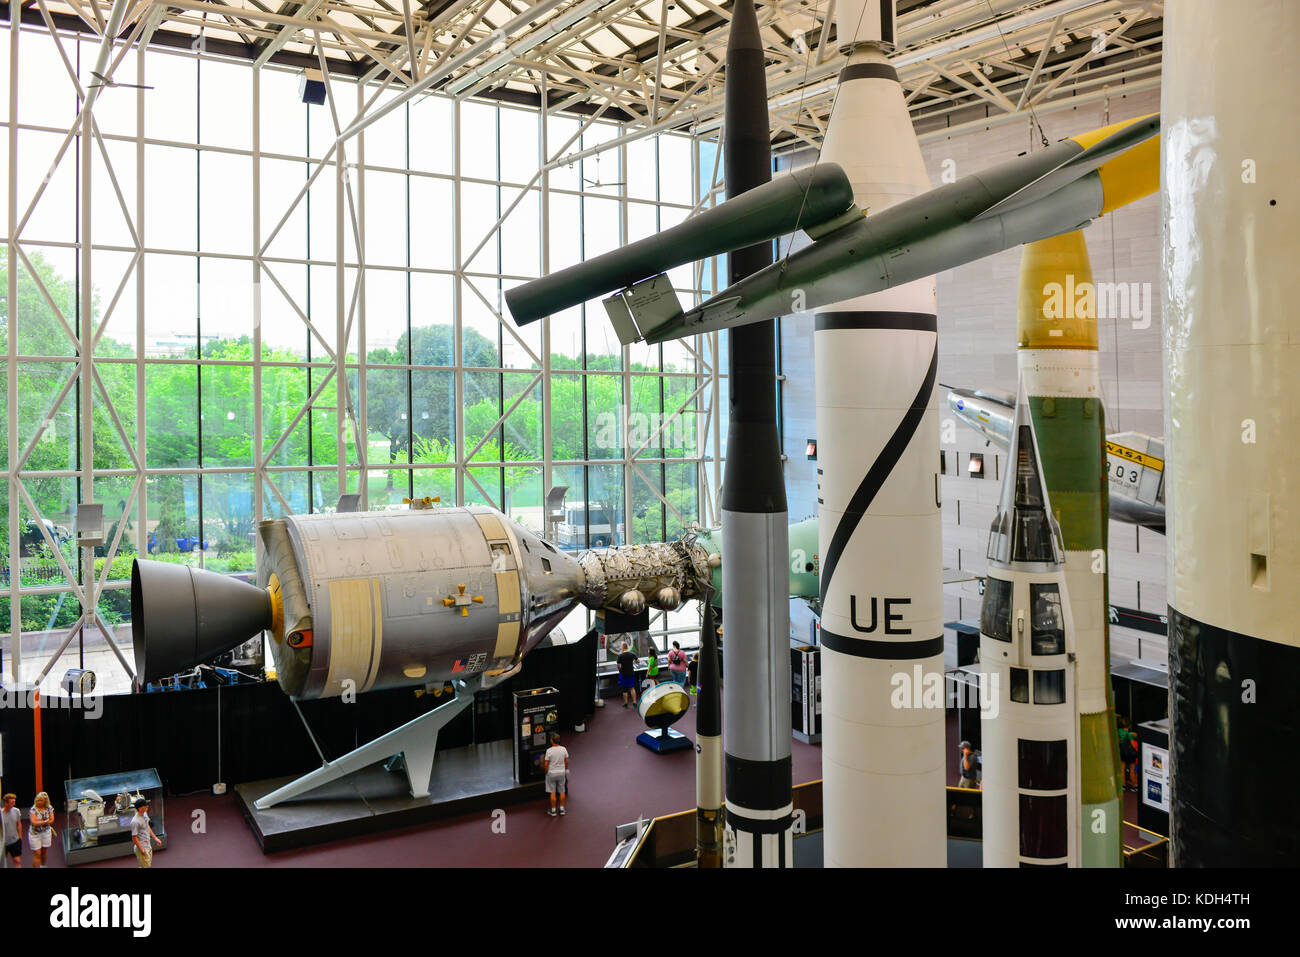 The Apollo Soyuz project display along with ICBMs inside the National Air and Space Museum in Washington, DC, USA Stock Photo